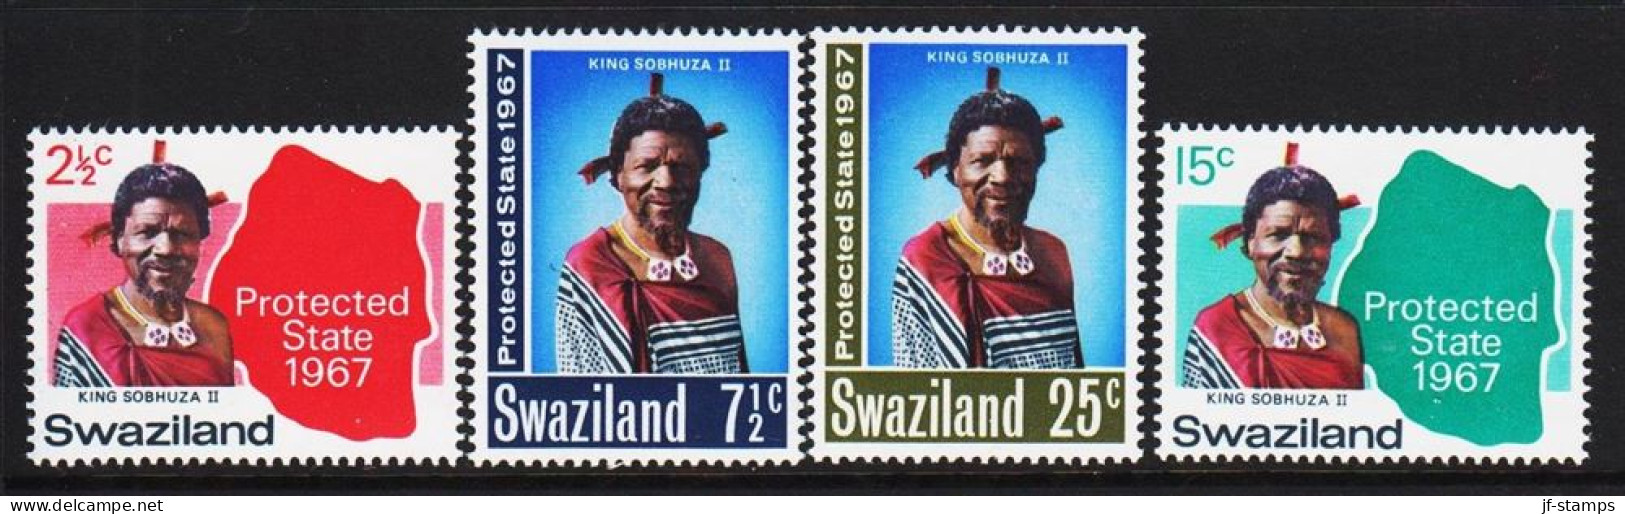 1967. SWAZILAND. Protected State Complete Set With 4 Stamps Never Hinged.  (MICHEL 126-129) - JF544939 - Swasiland (...-1967)